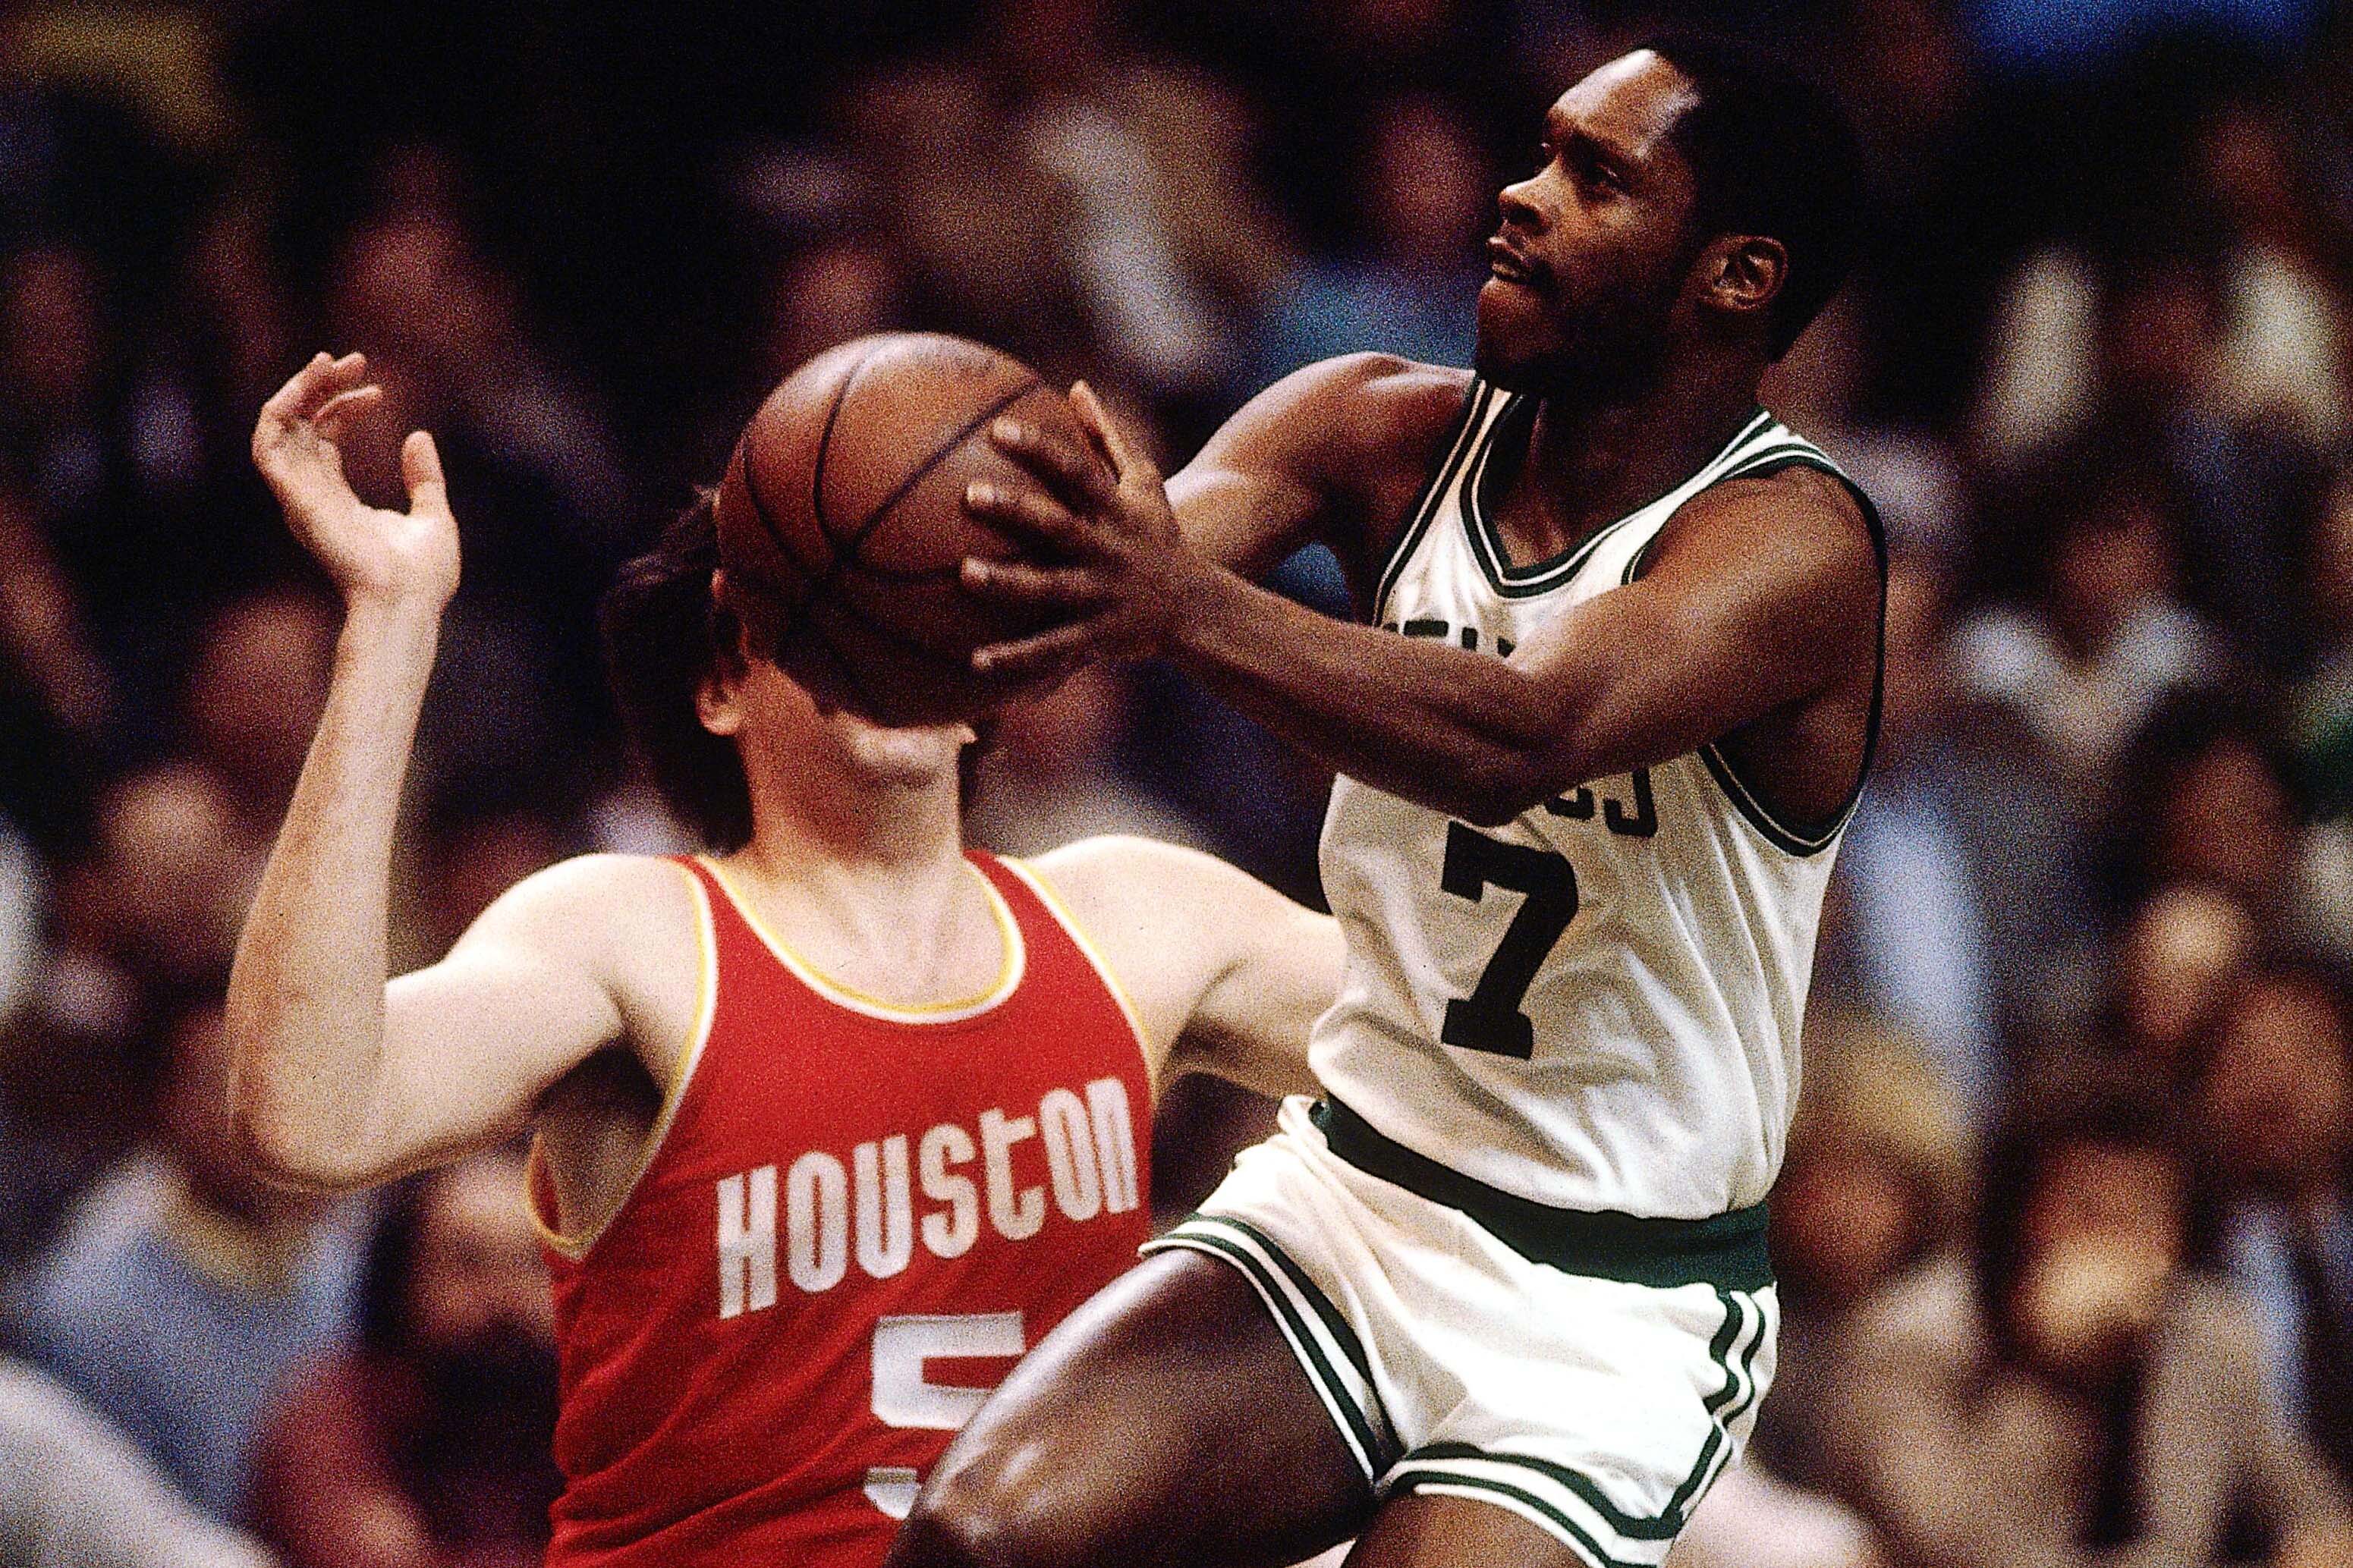 BOSTON - 1980: Nate Archibald #7 of the Boston Celtics drives to the basket against the Houston Rockets at the Boston Garden in Boston, Massachusetts. NOTE TO USER: User expressly acknowledges and agrees that, by downloading and or using this photograph, User is consenting to the terms and conditions of the Getty Images License Agreement. Mandatory copyright notice: Copyright NBAE 1980 (Photo by Walter Iooss Jr./ NBAE/ Getty Images)